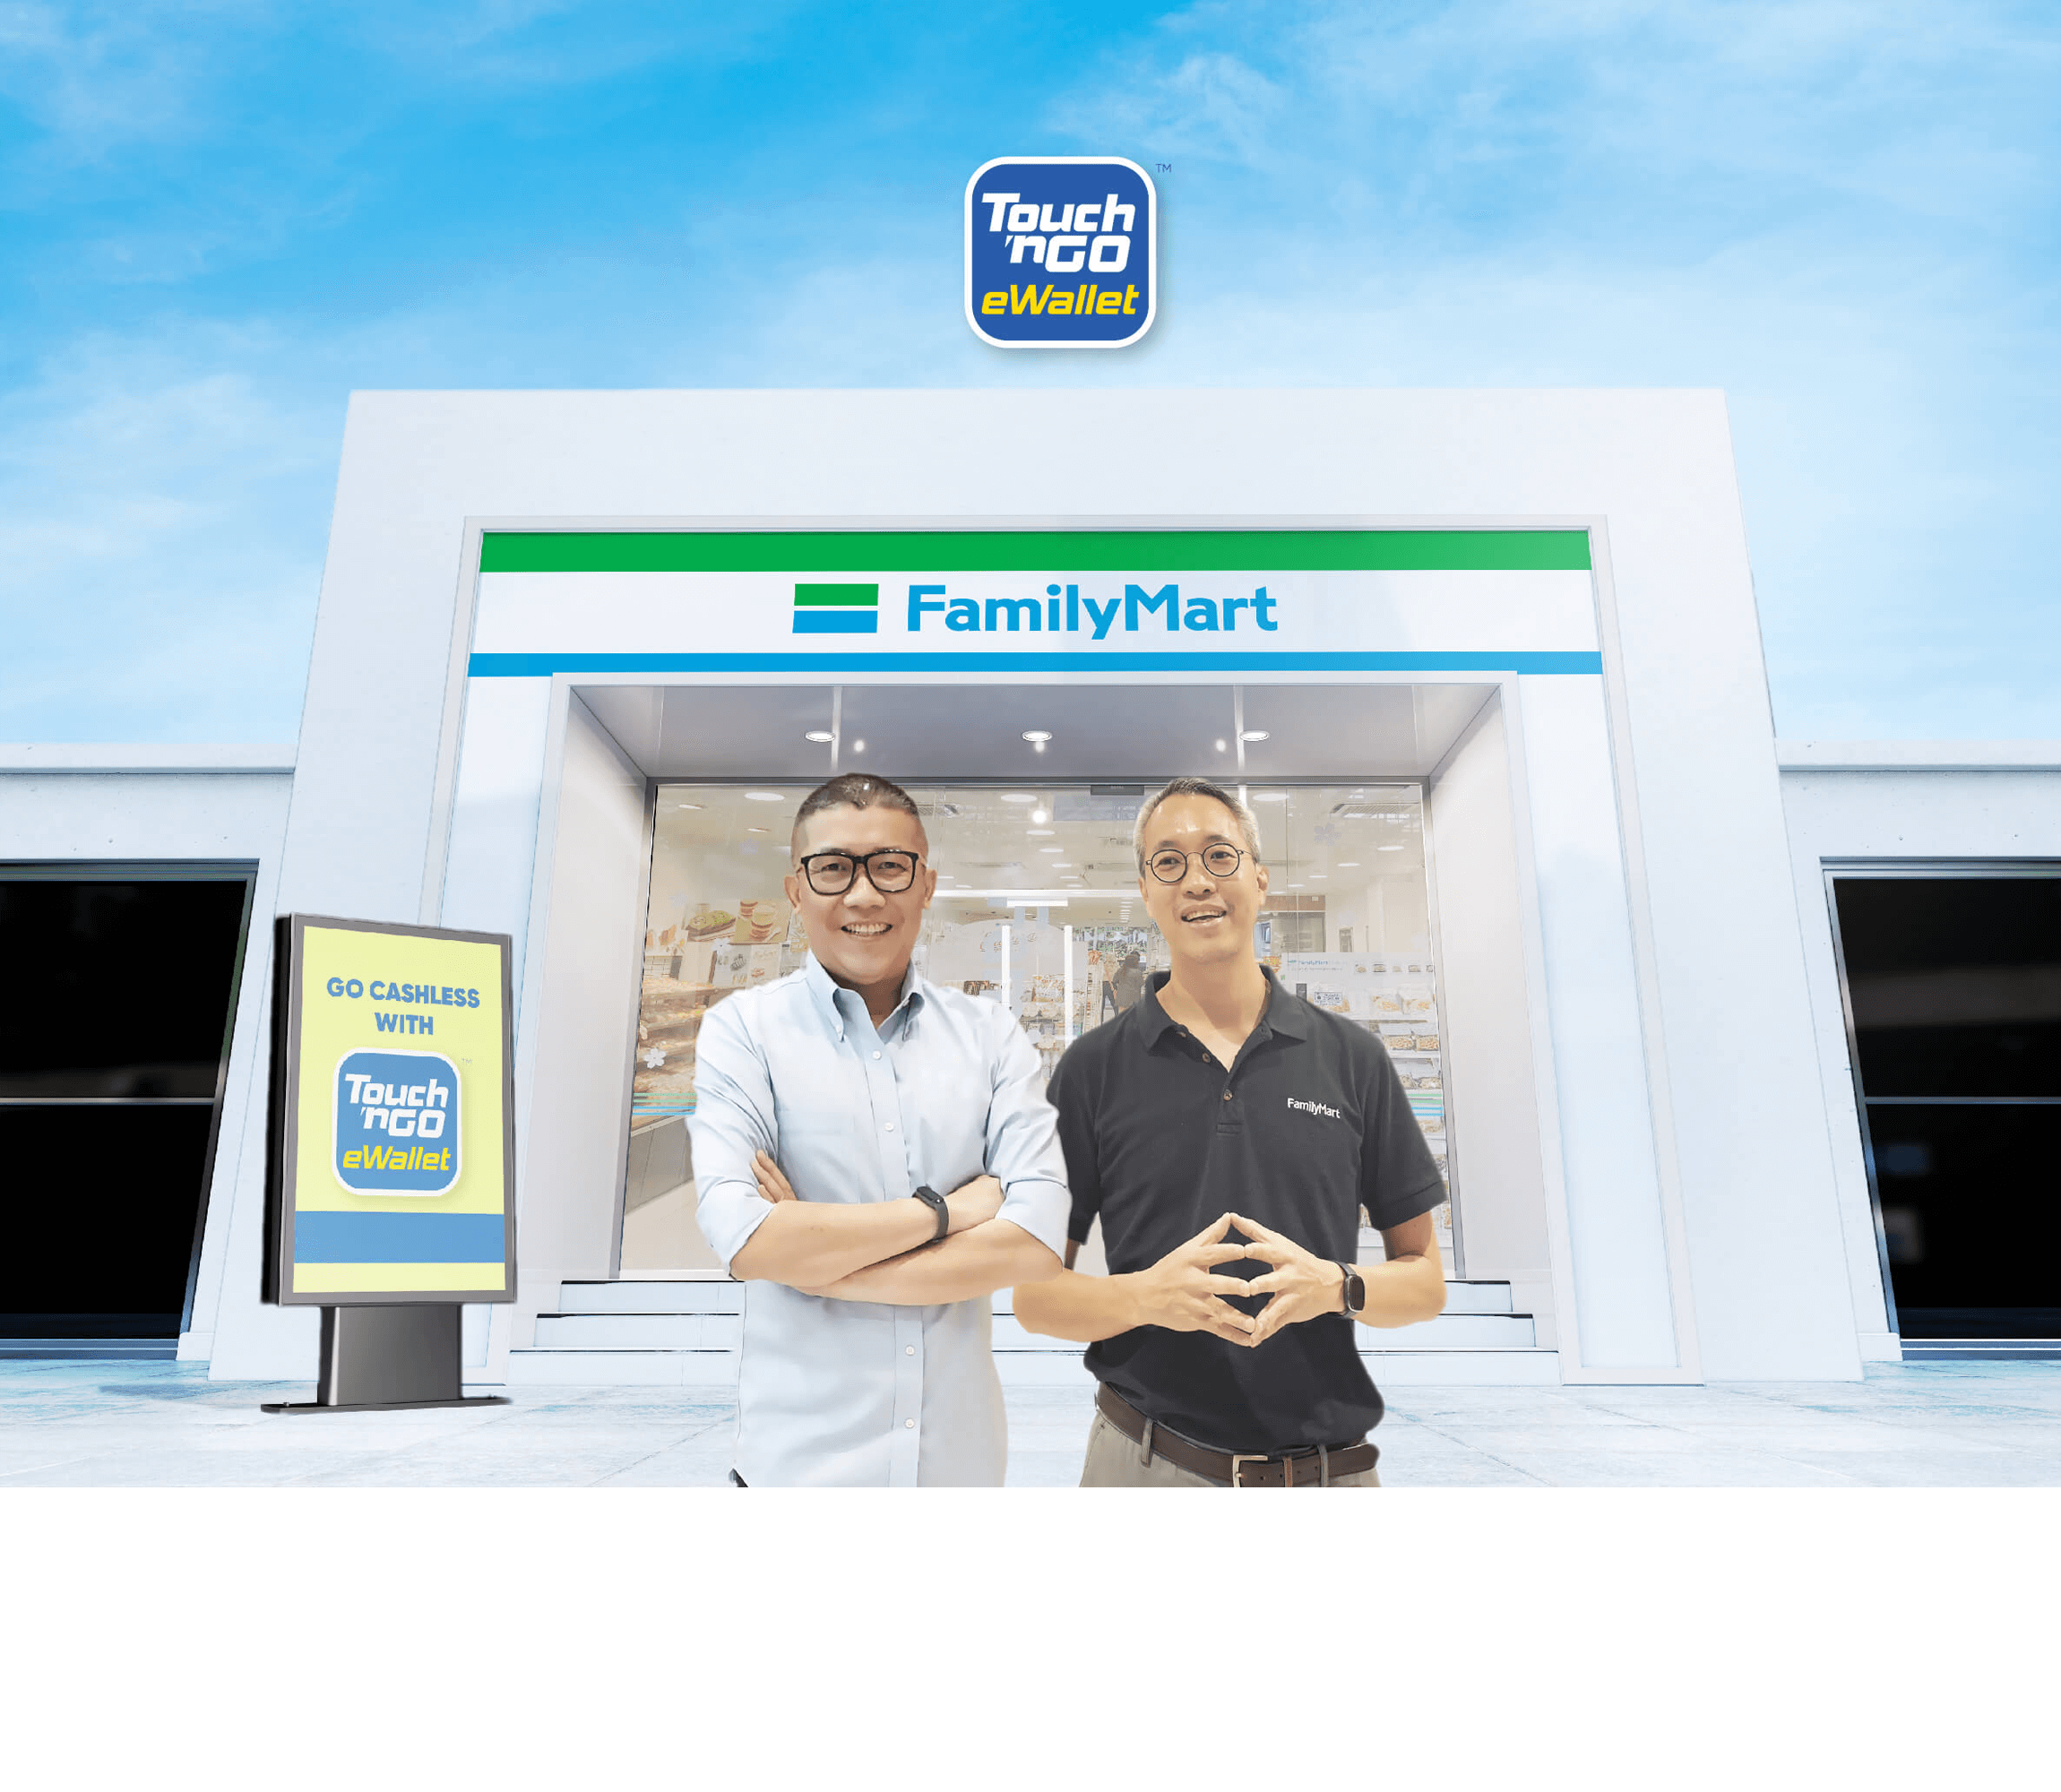 Users Can Now Use FamiDelivery Via the Touch ‘n Go eWallet App